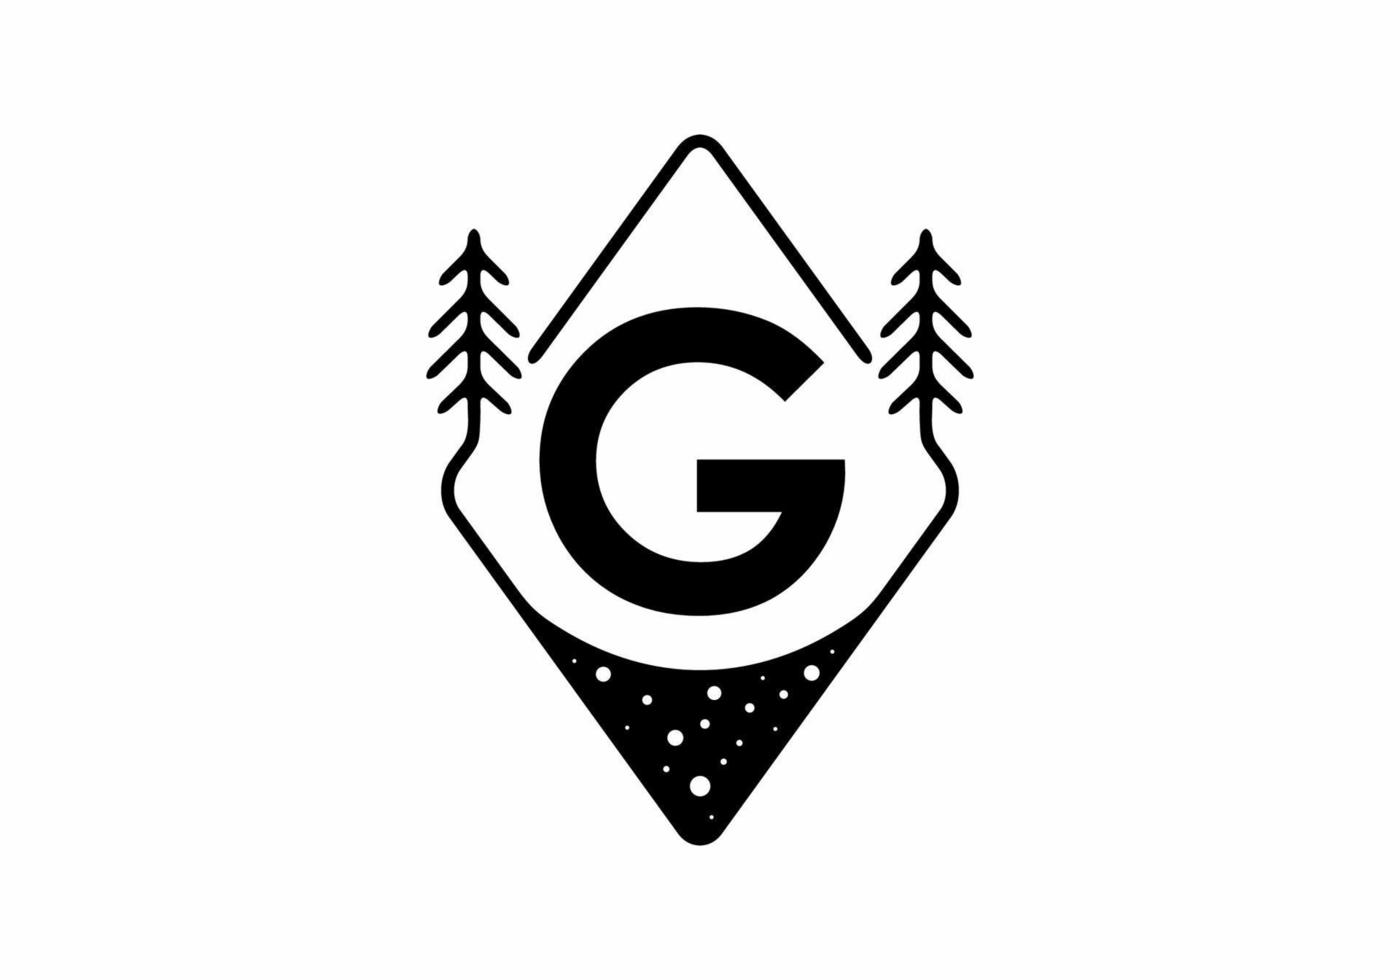 Black line art badge with pine trees and G letter vector